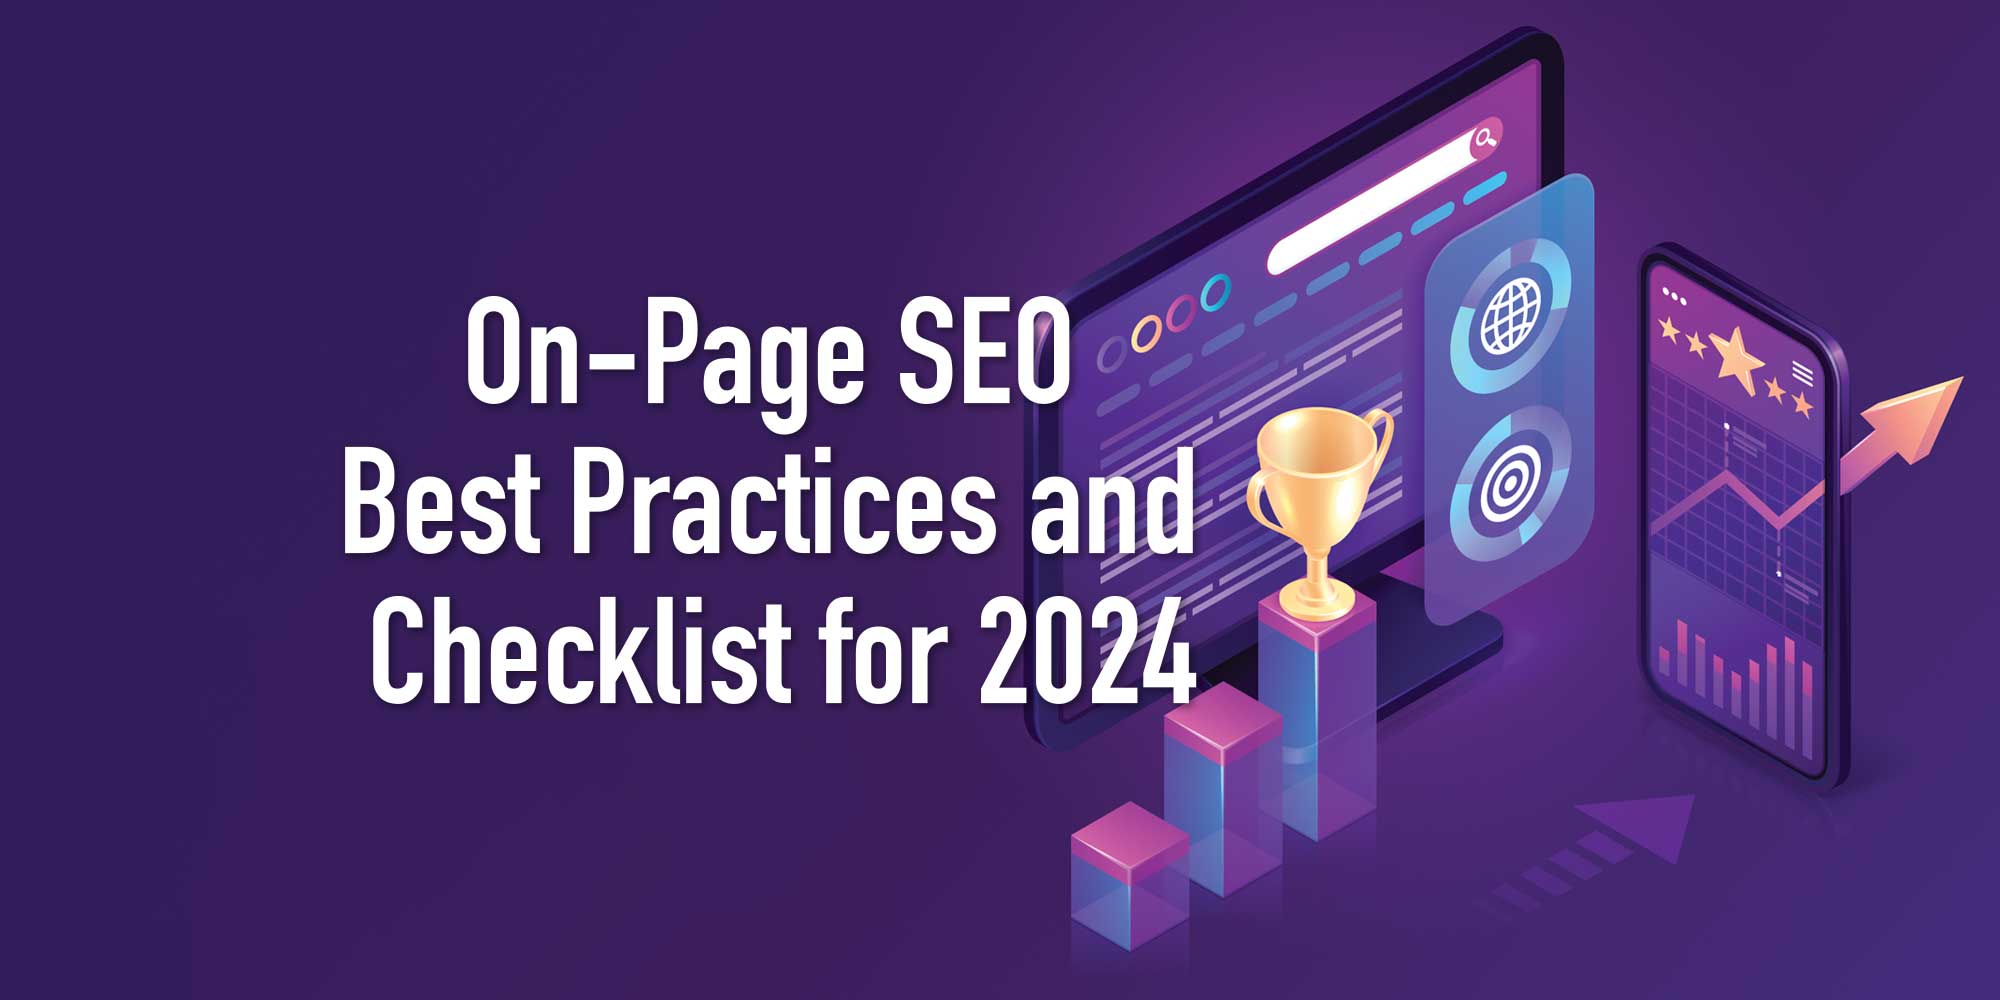 On-Page SEO Best Practices and Checklist for 2024